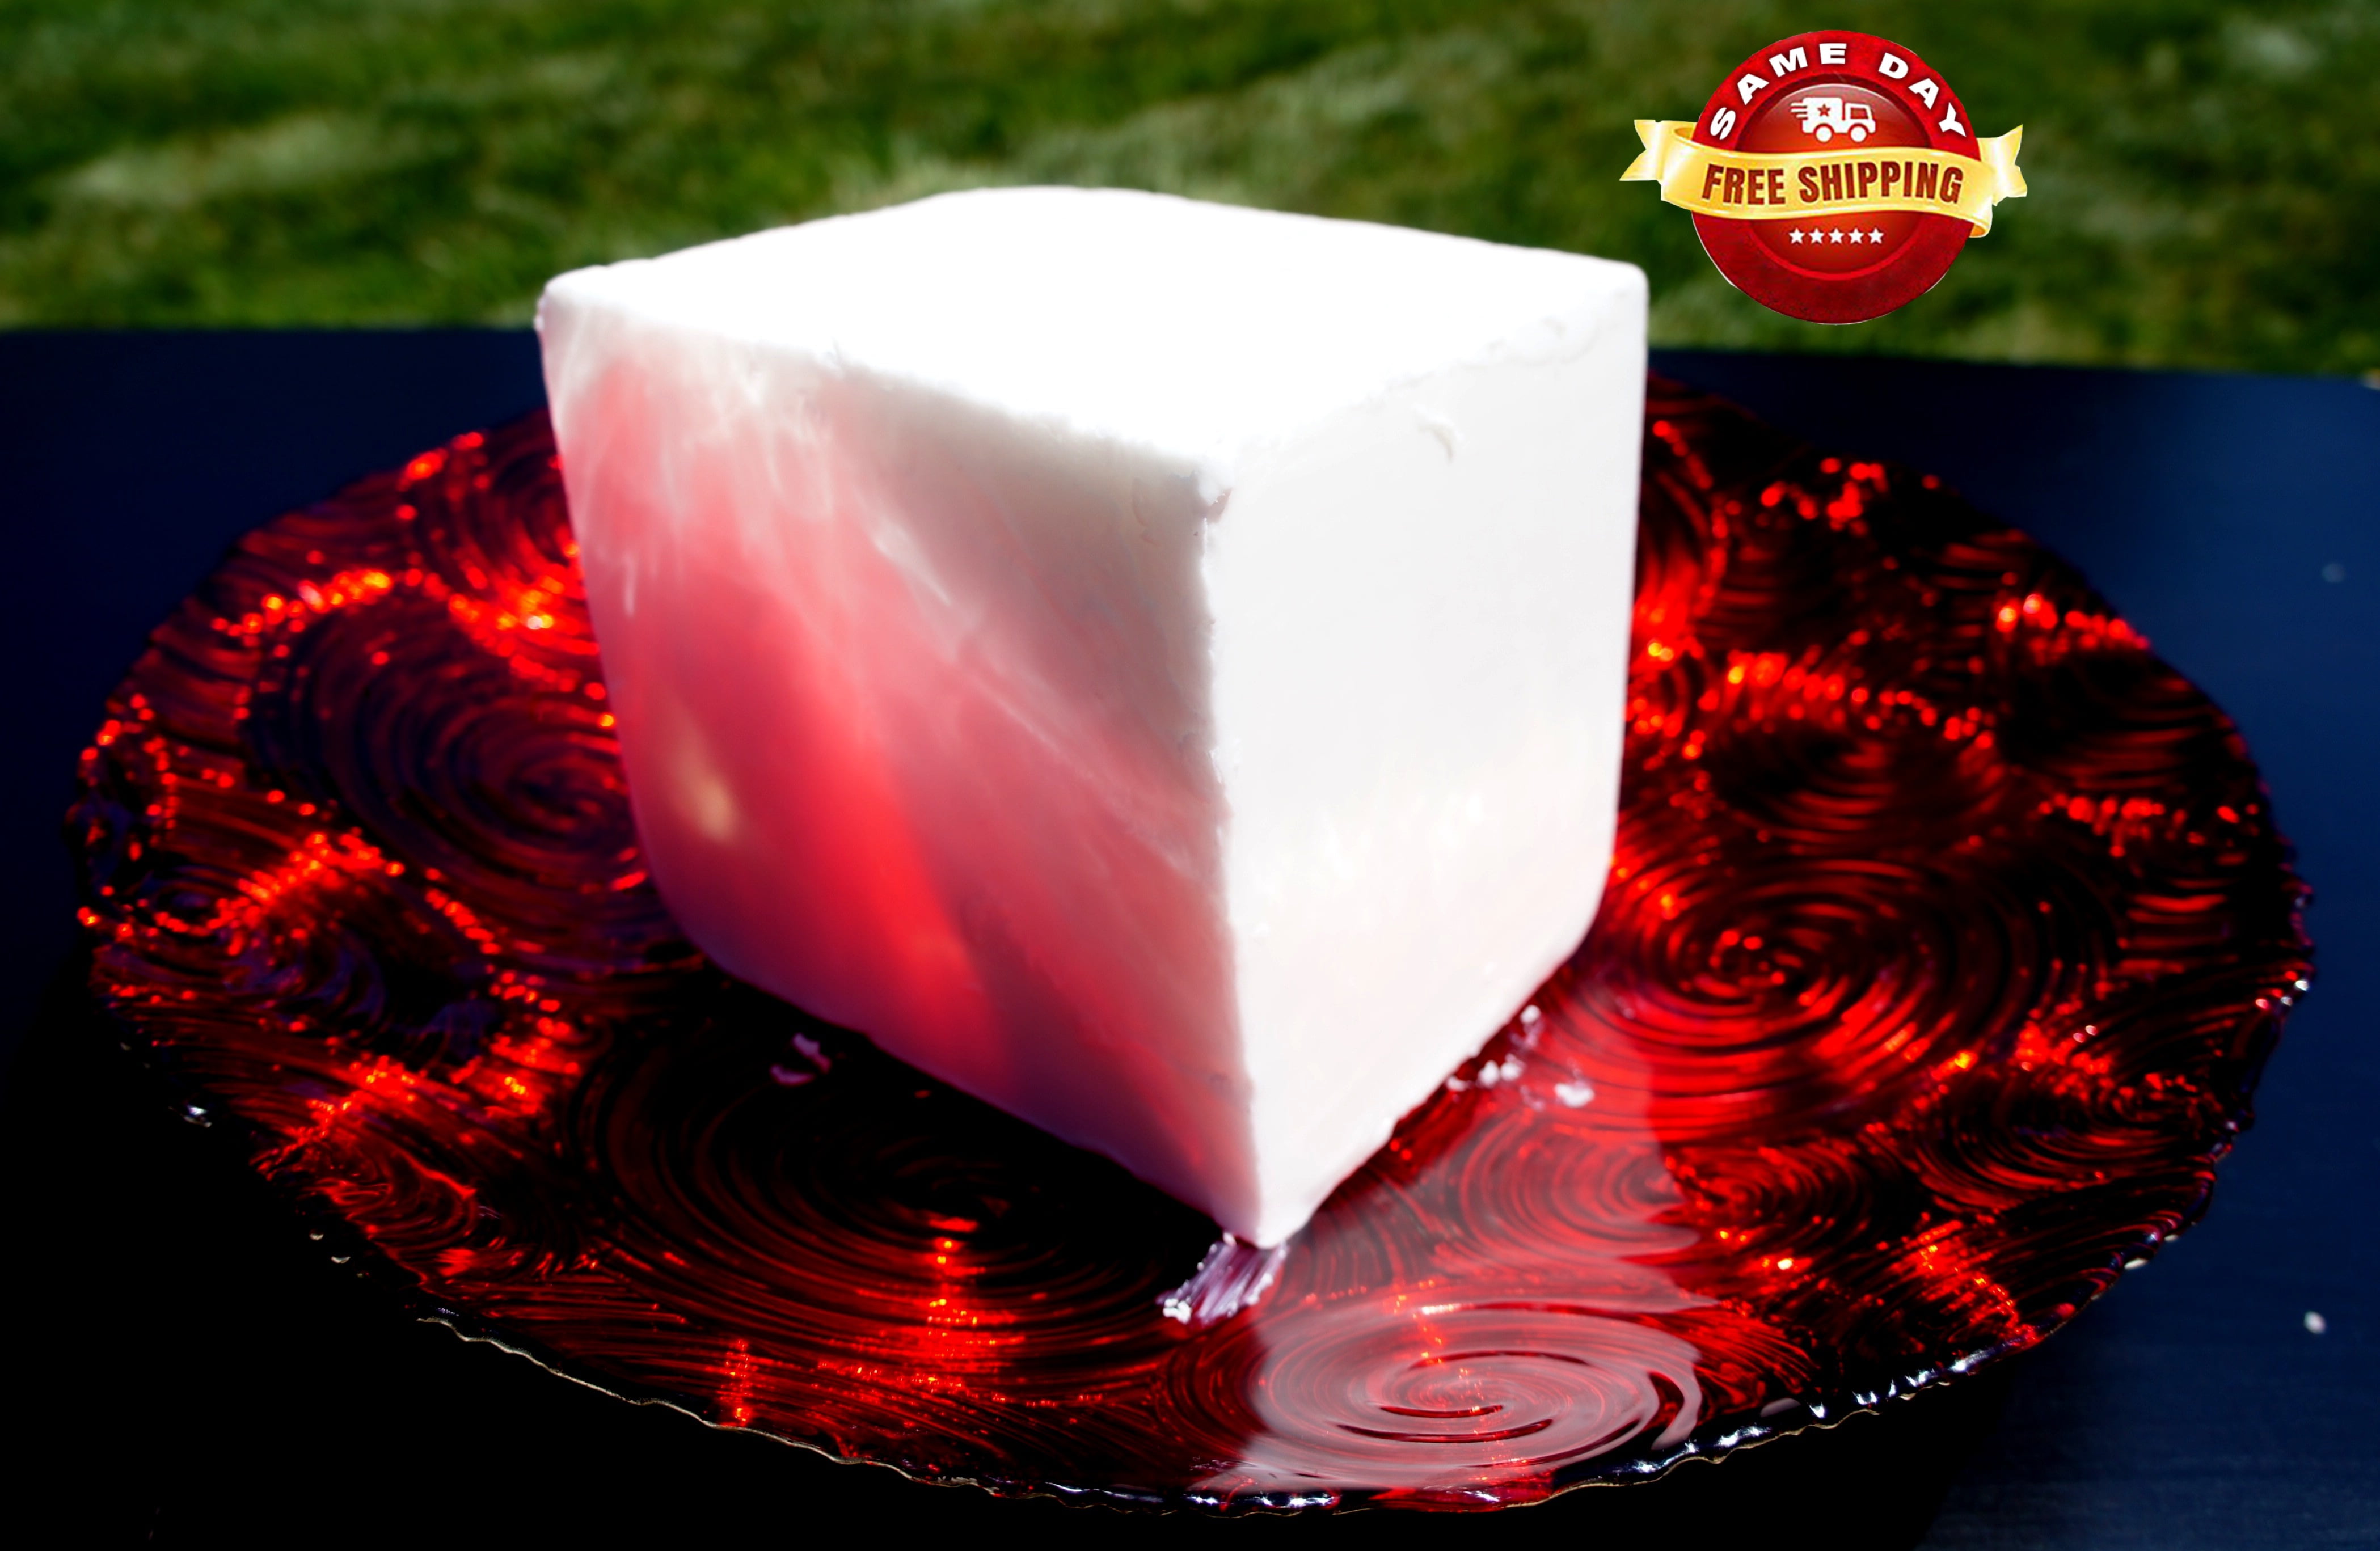 Melt & Pour All Natural Bar for The Best Result 100% Organic Glycerin & SHEA Butter Soap Base by Velona 5 lb Size